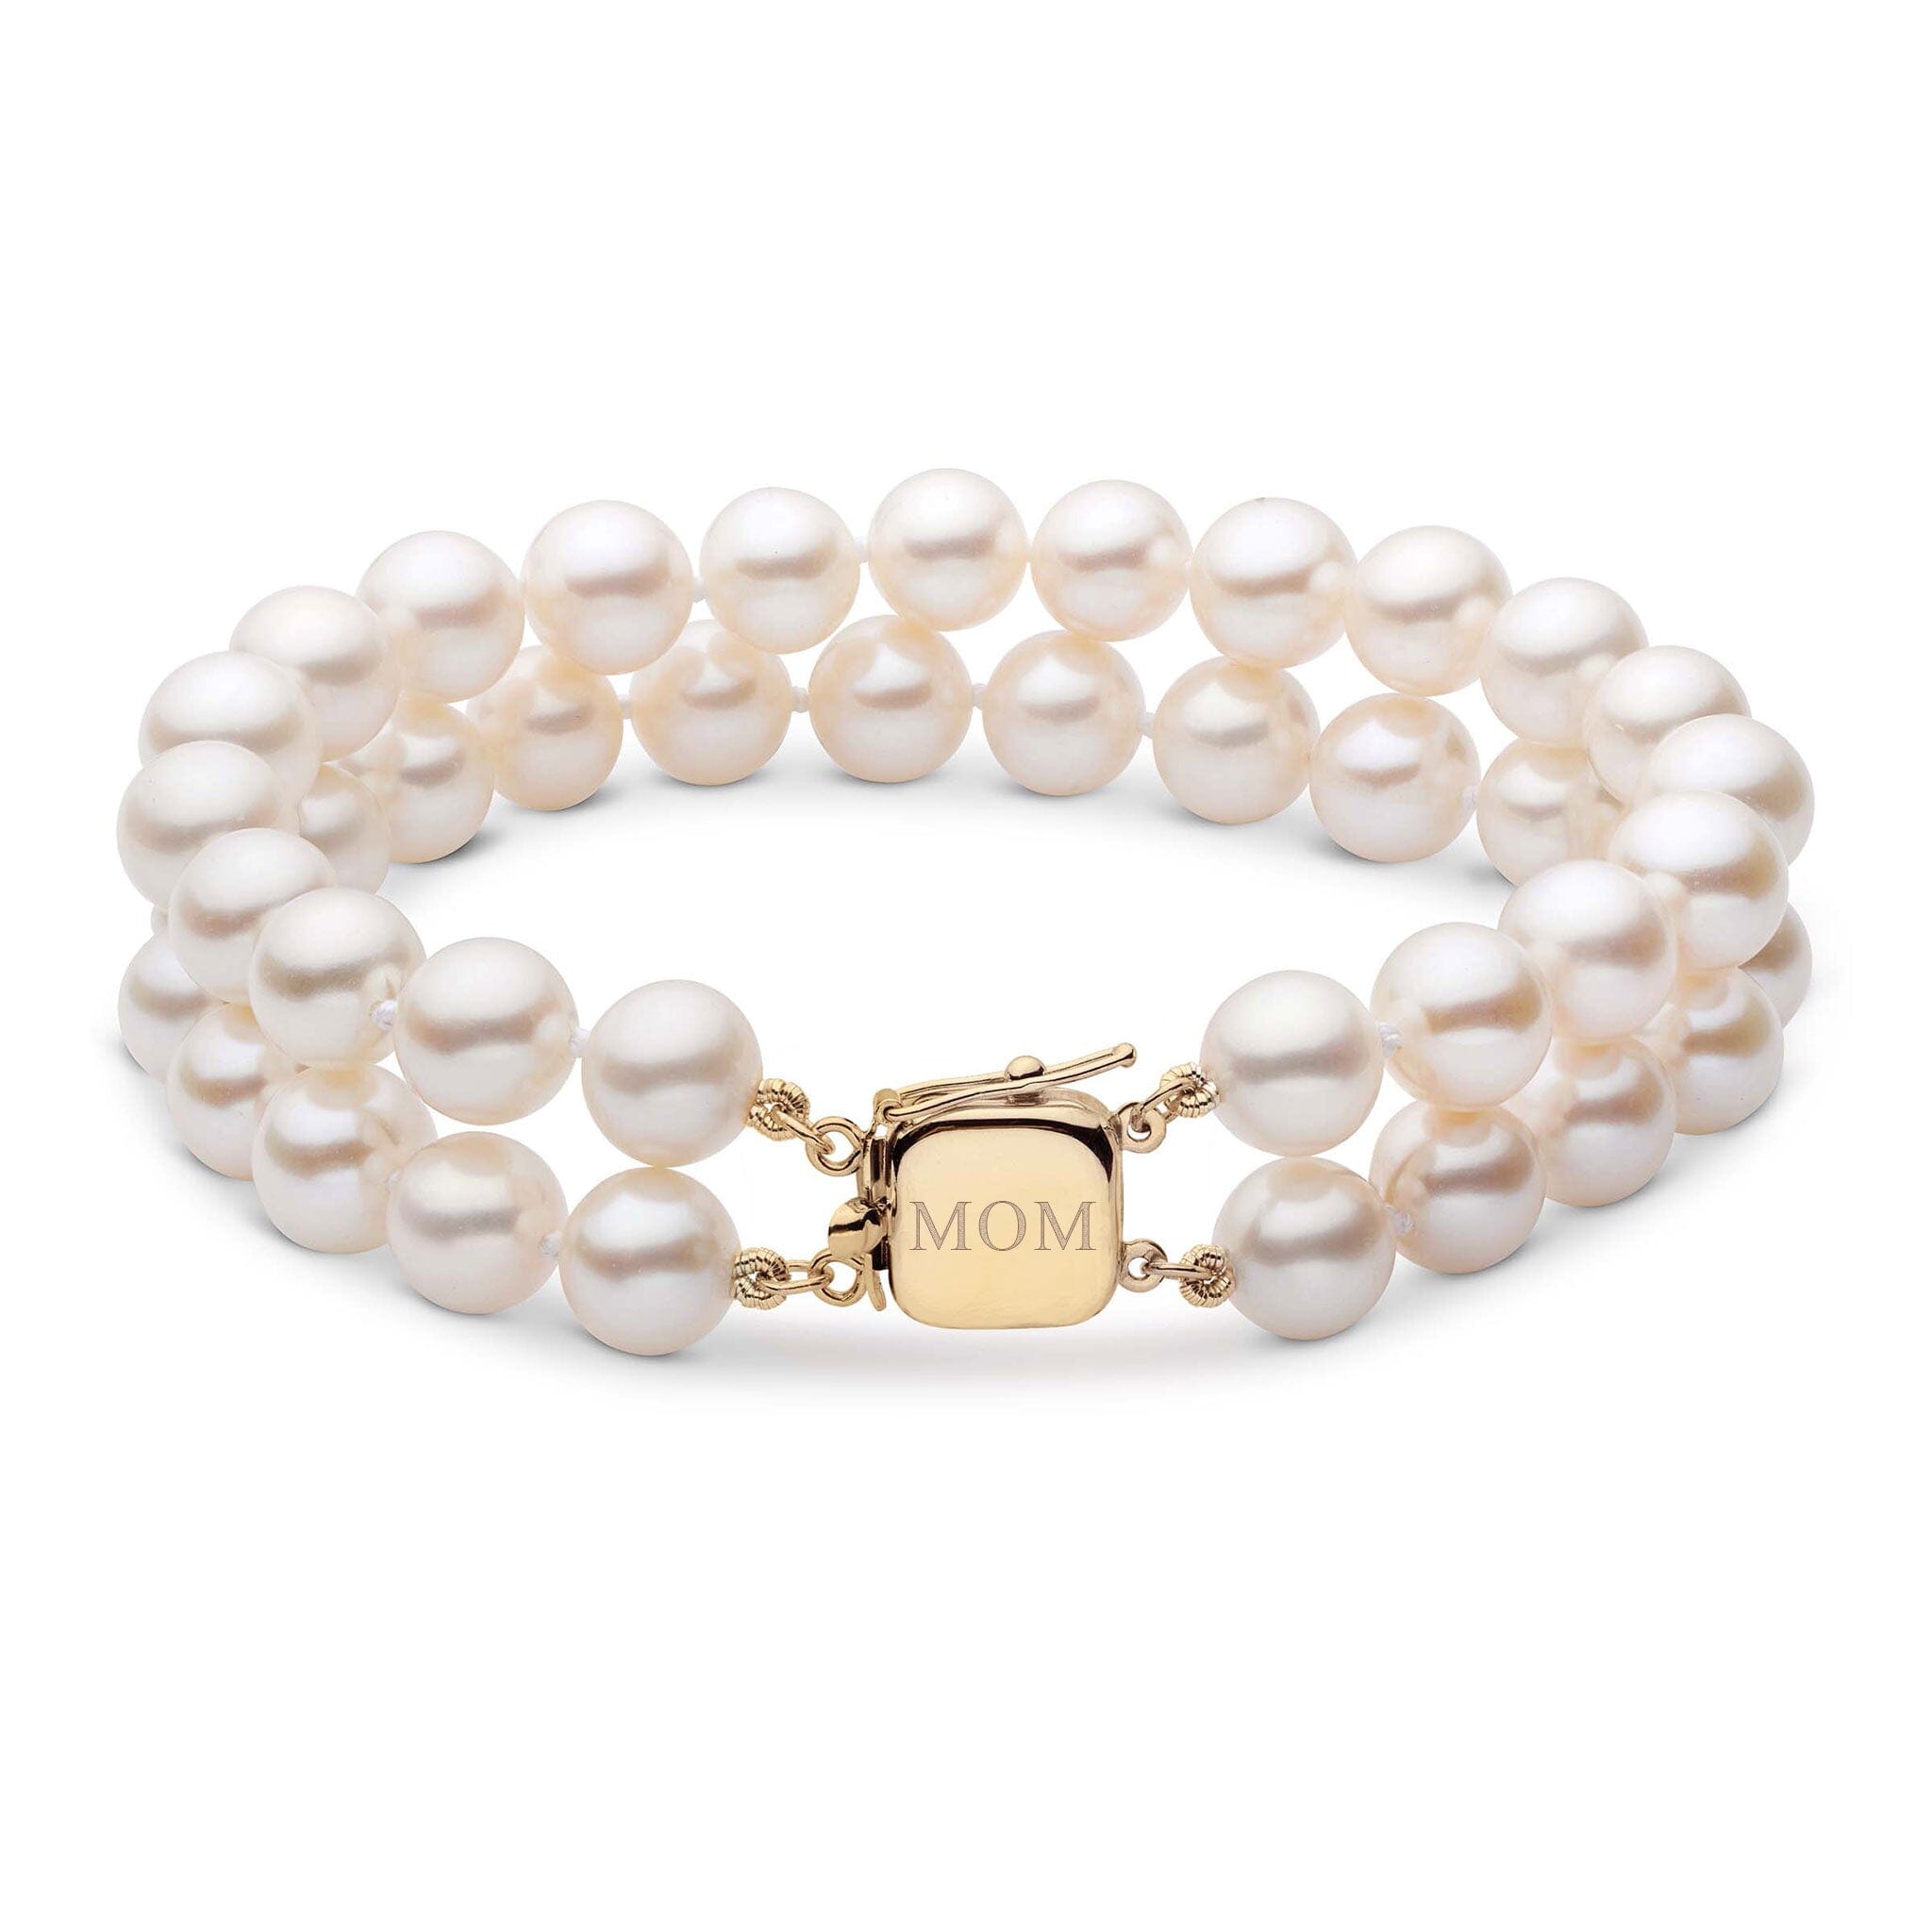 Personalized 7.0-7.5 mm AAA Akoya Pearl Double Strand Square Clasp Bracelet